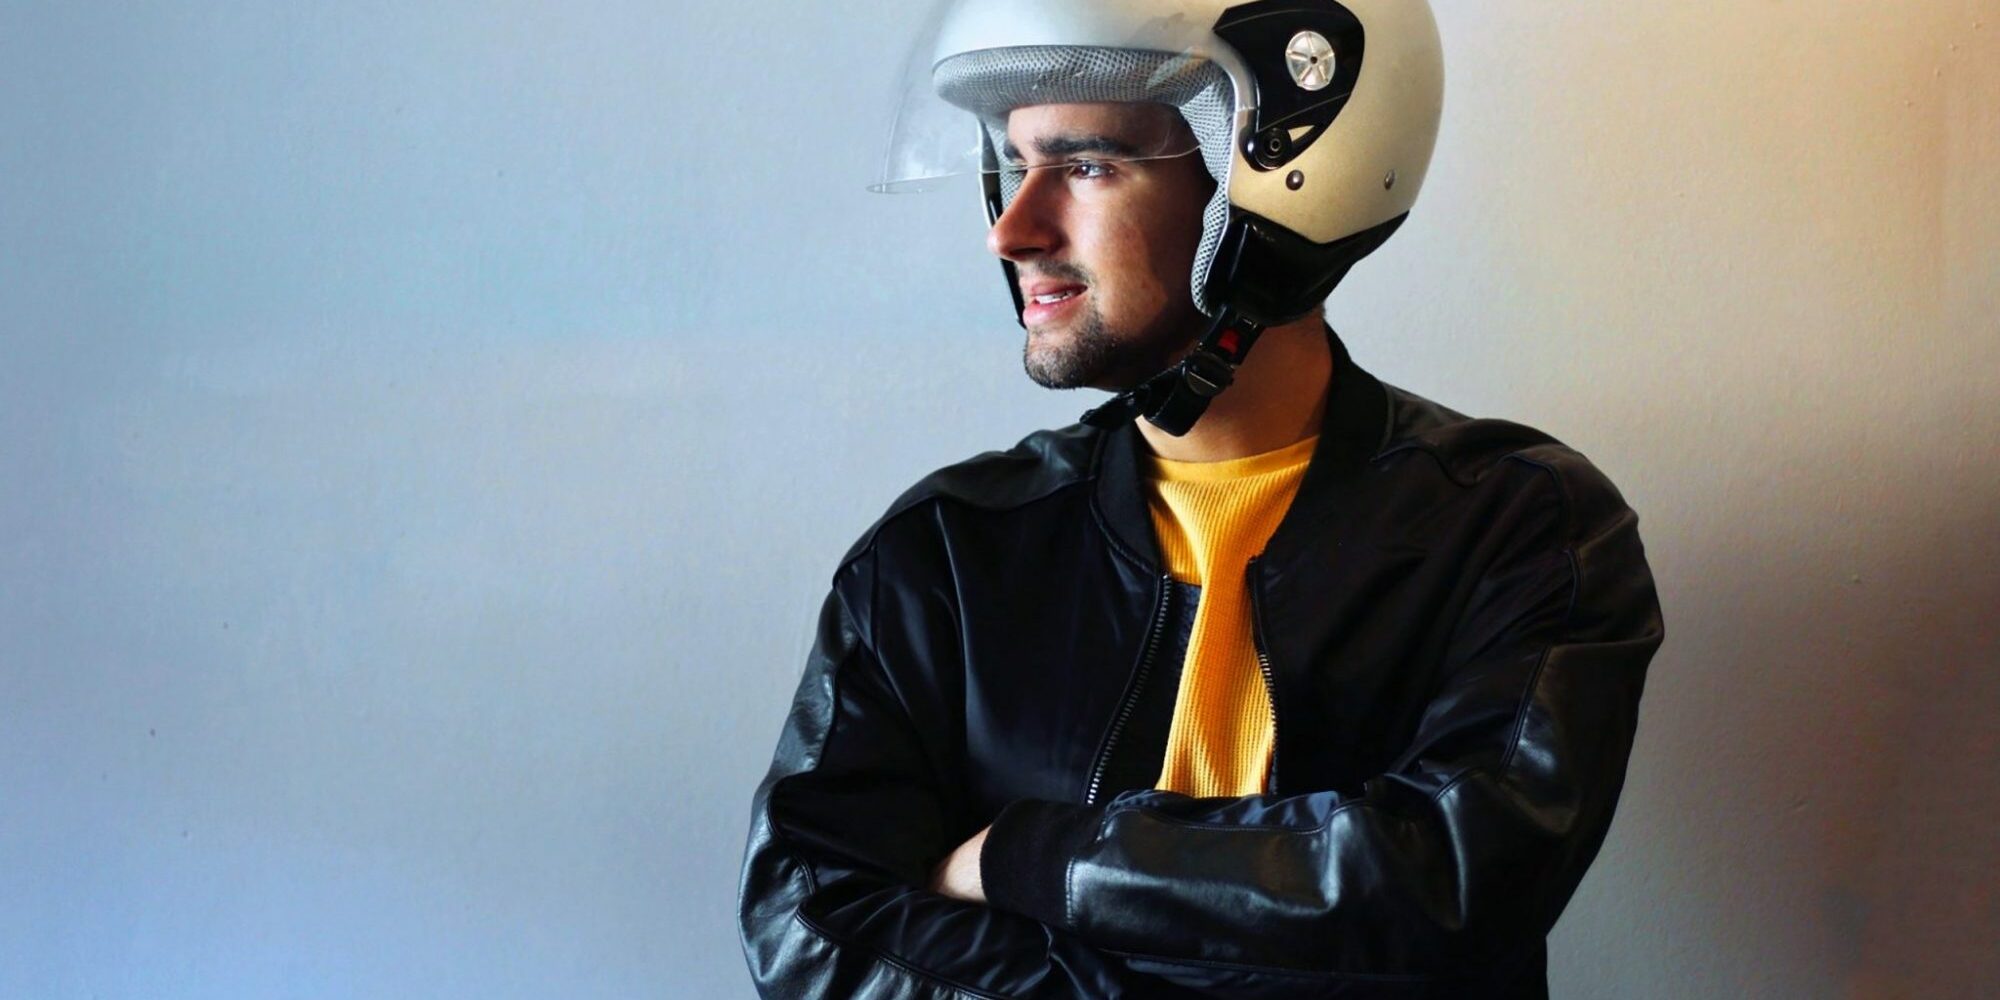 Young biker with a gray motorcycle helmet on. Road safety campaign. Copy Space.